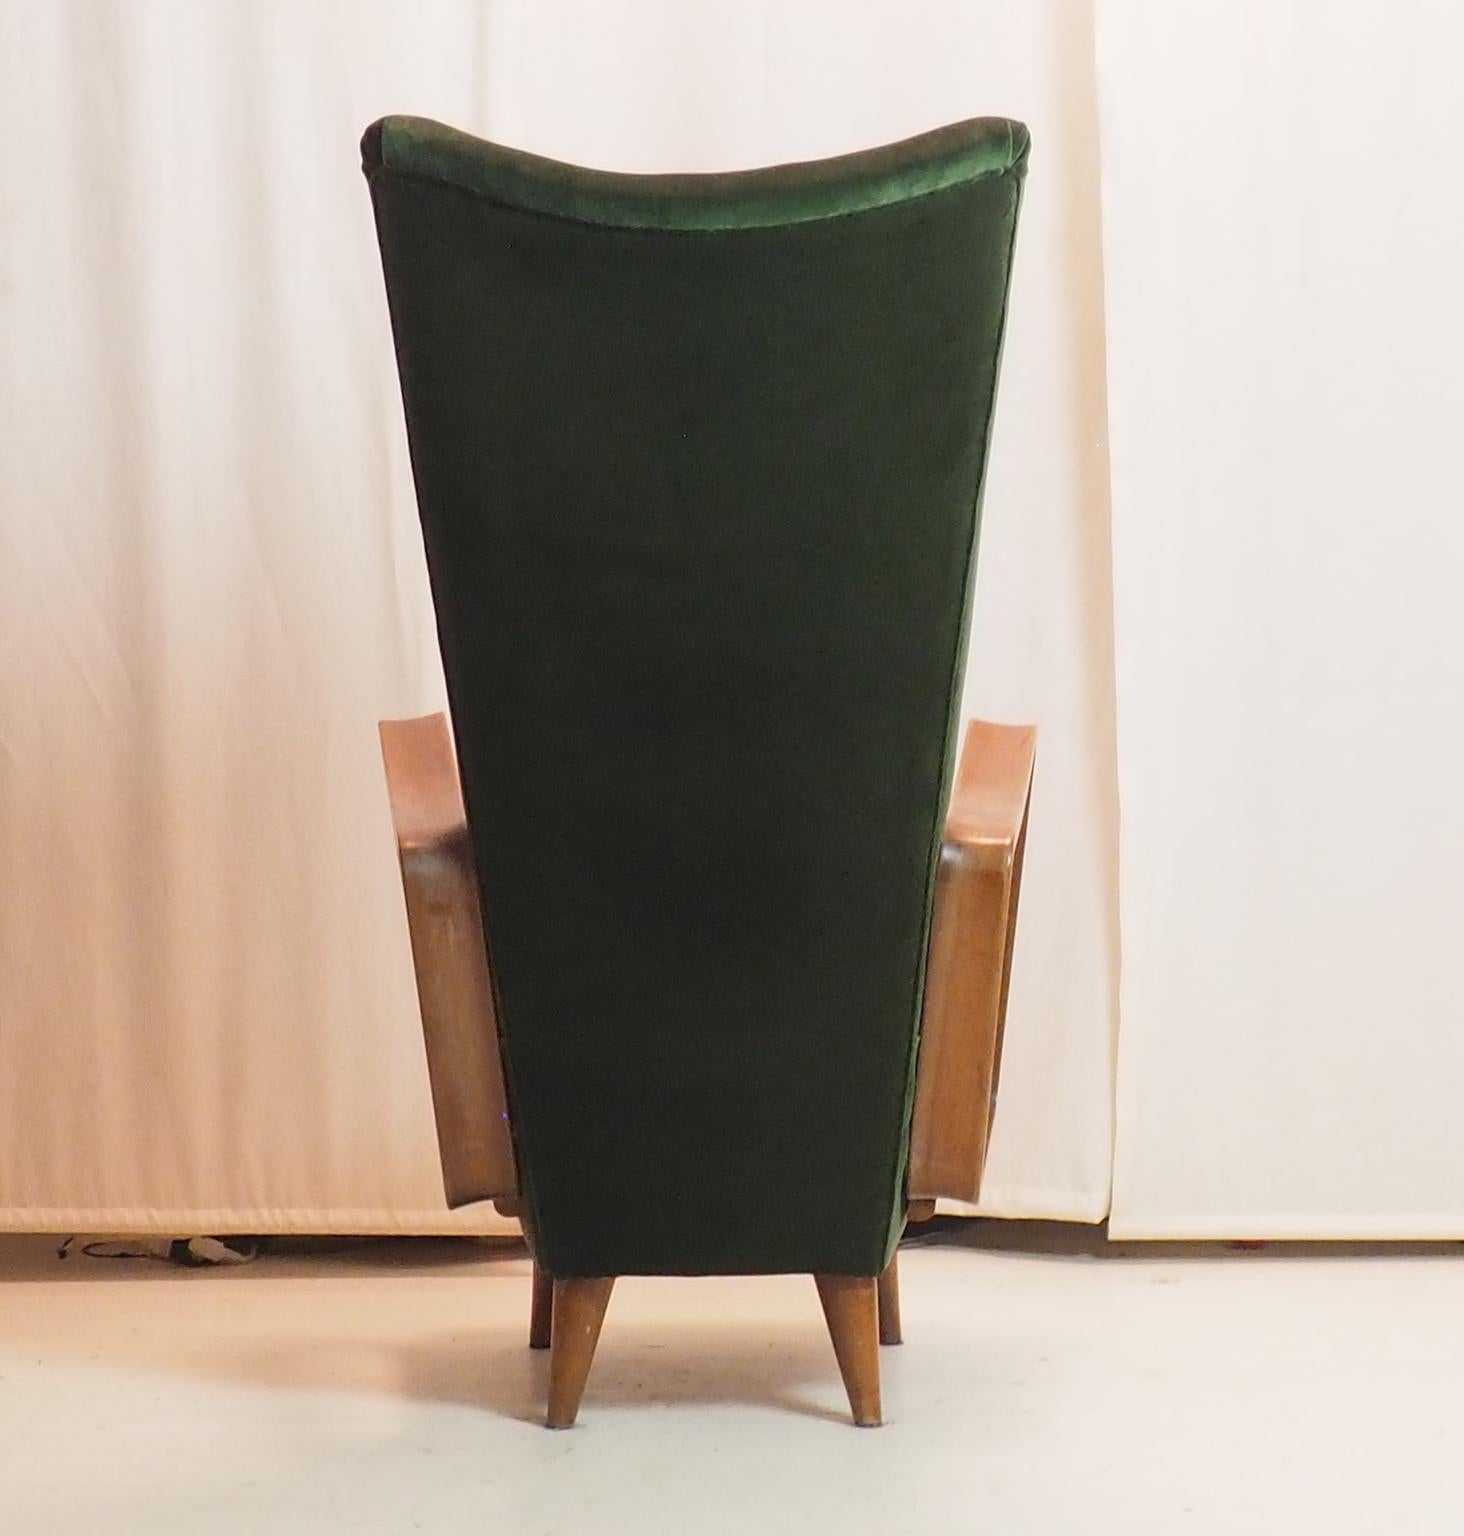 Midcentury High Back Italian Green Armchairs by Pietro Lingeri, Italy, 1950s For Sale 6